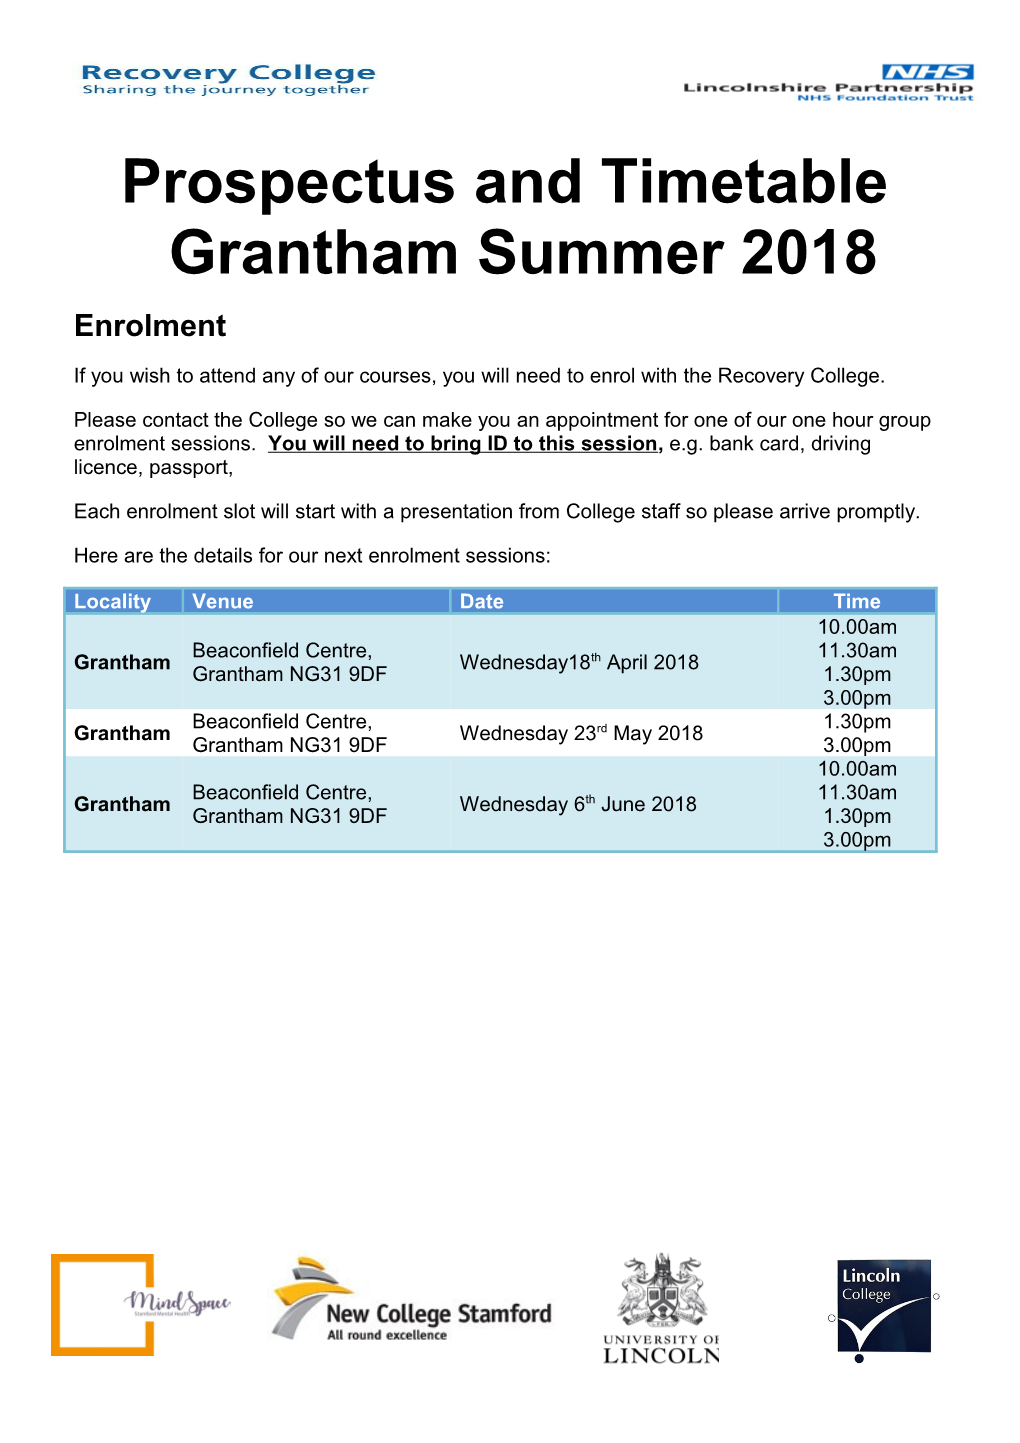 Prospectus and Timetable Granthamsummer 2018